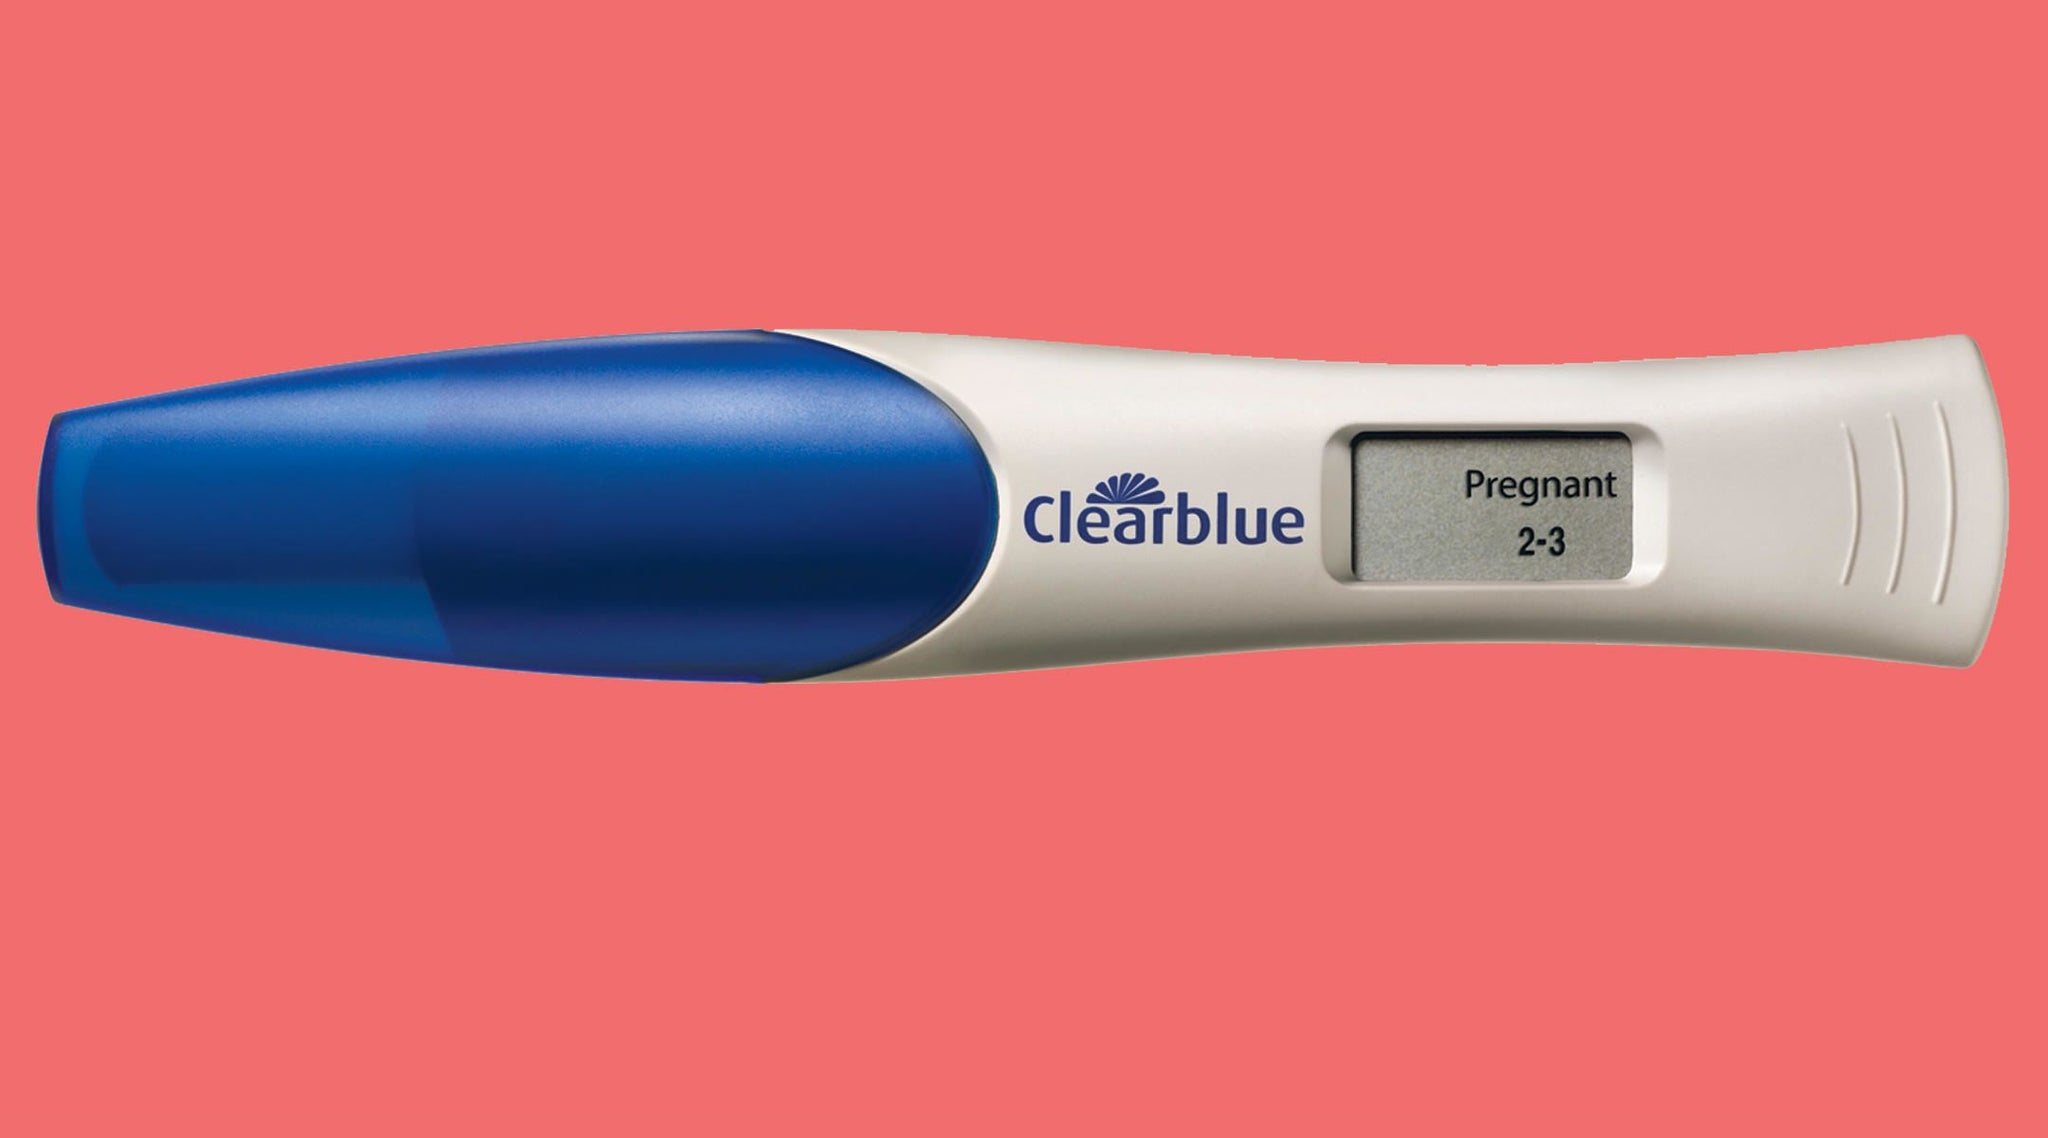 How to Take a Clear Blue Pregnancy Test